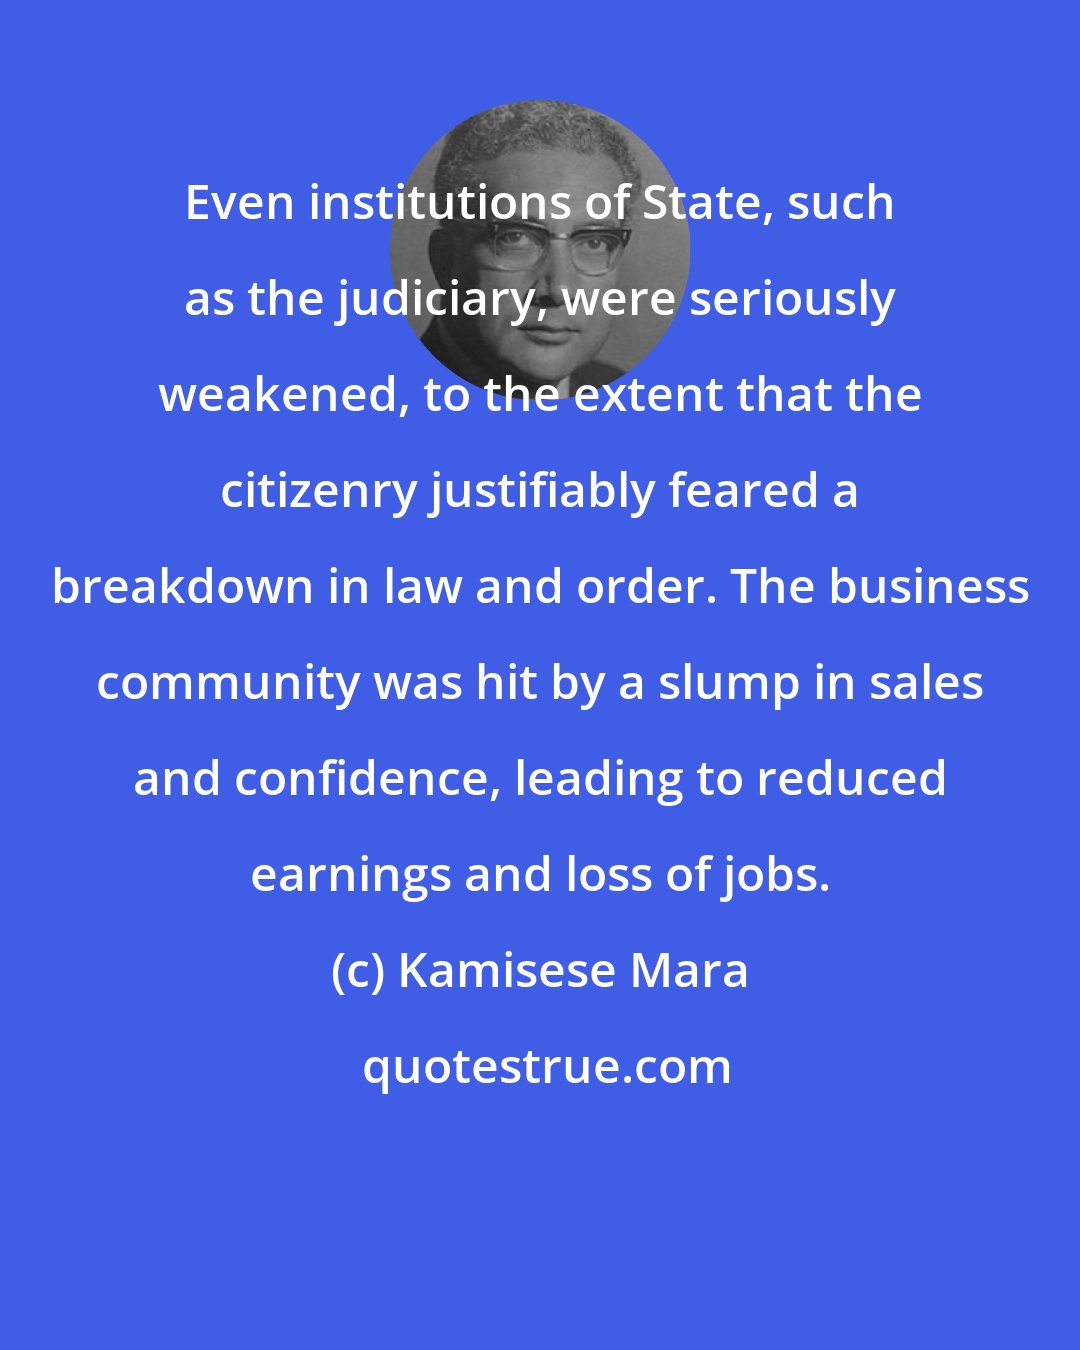 Kamisese Mara: Even institutions of State, such as the judiciary, were seriously weakened, to the extent that the citizenry justifiably feared a breakdown in law and order. The business community was hit by a slump in sales and confidence, leading to reduced earnings and loss of jobs.